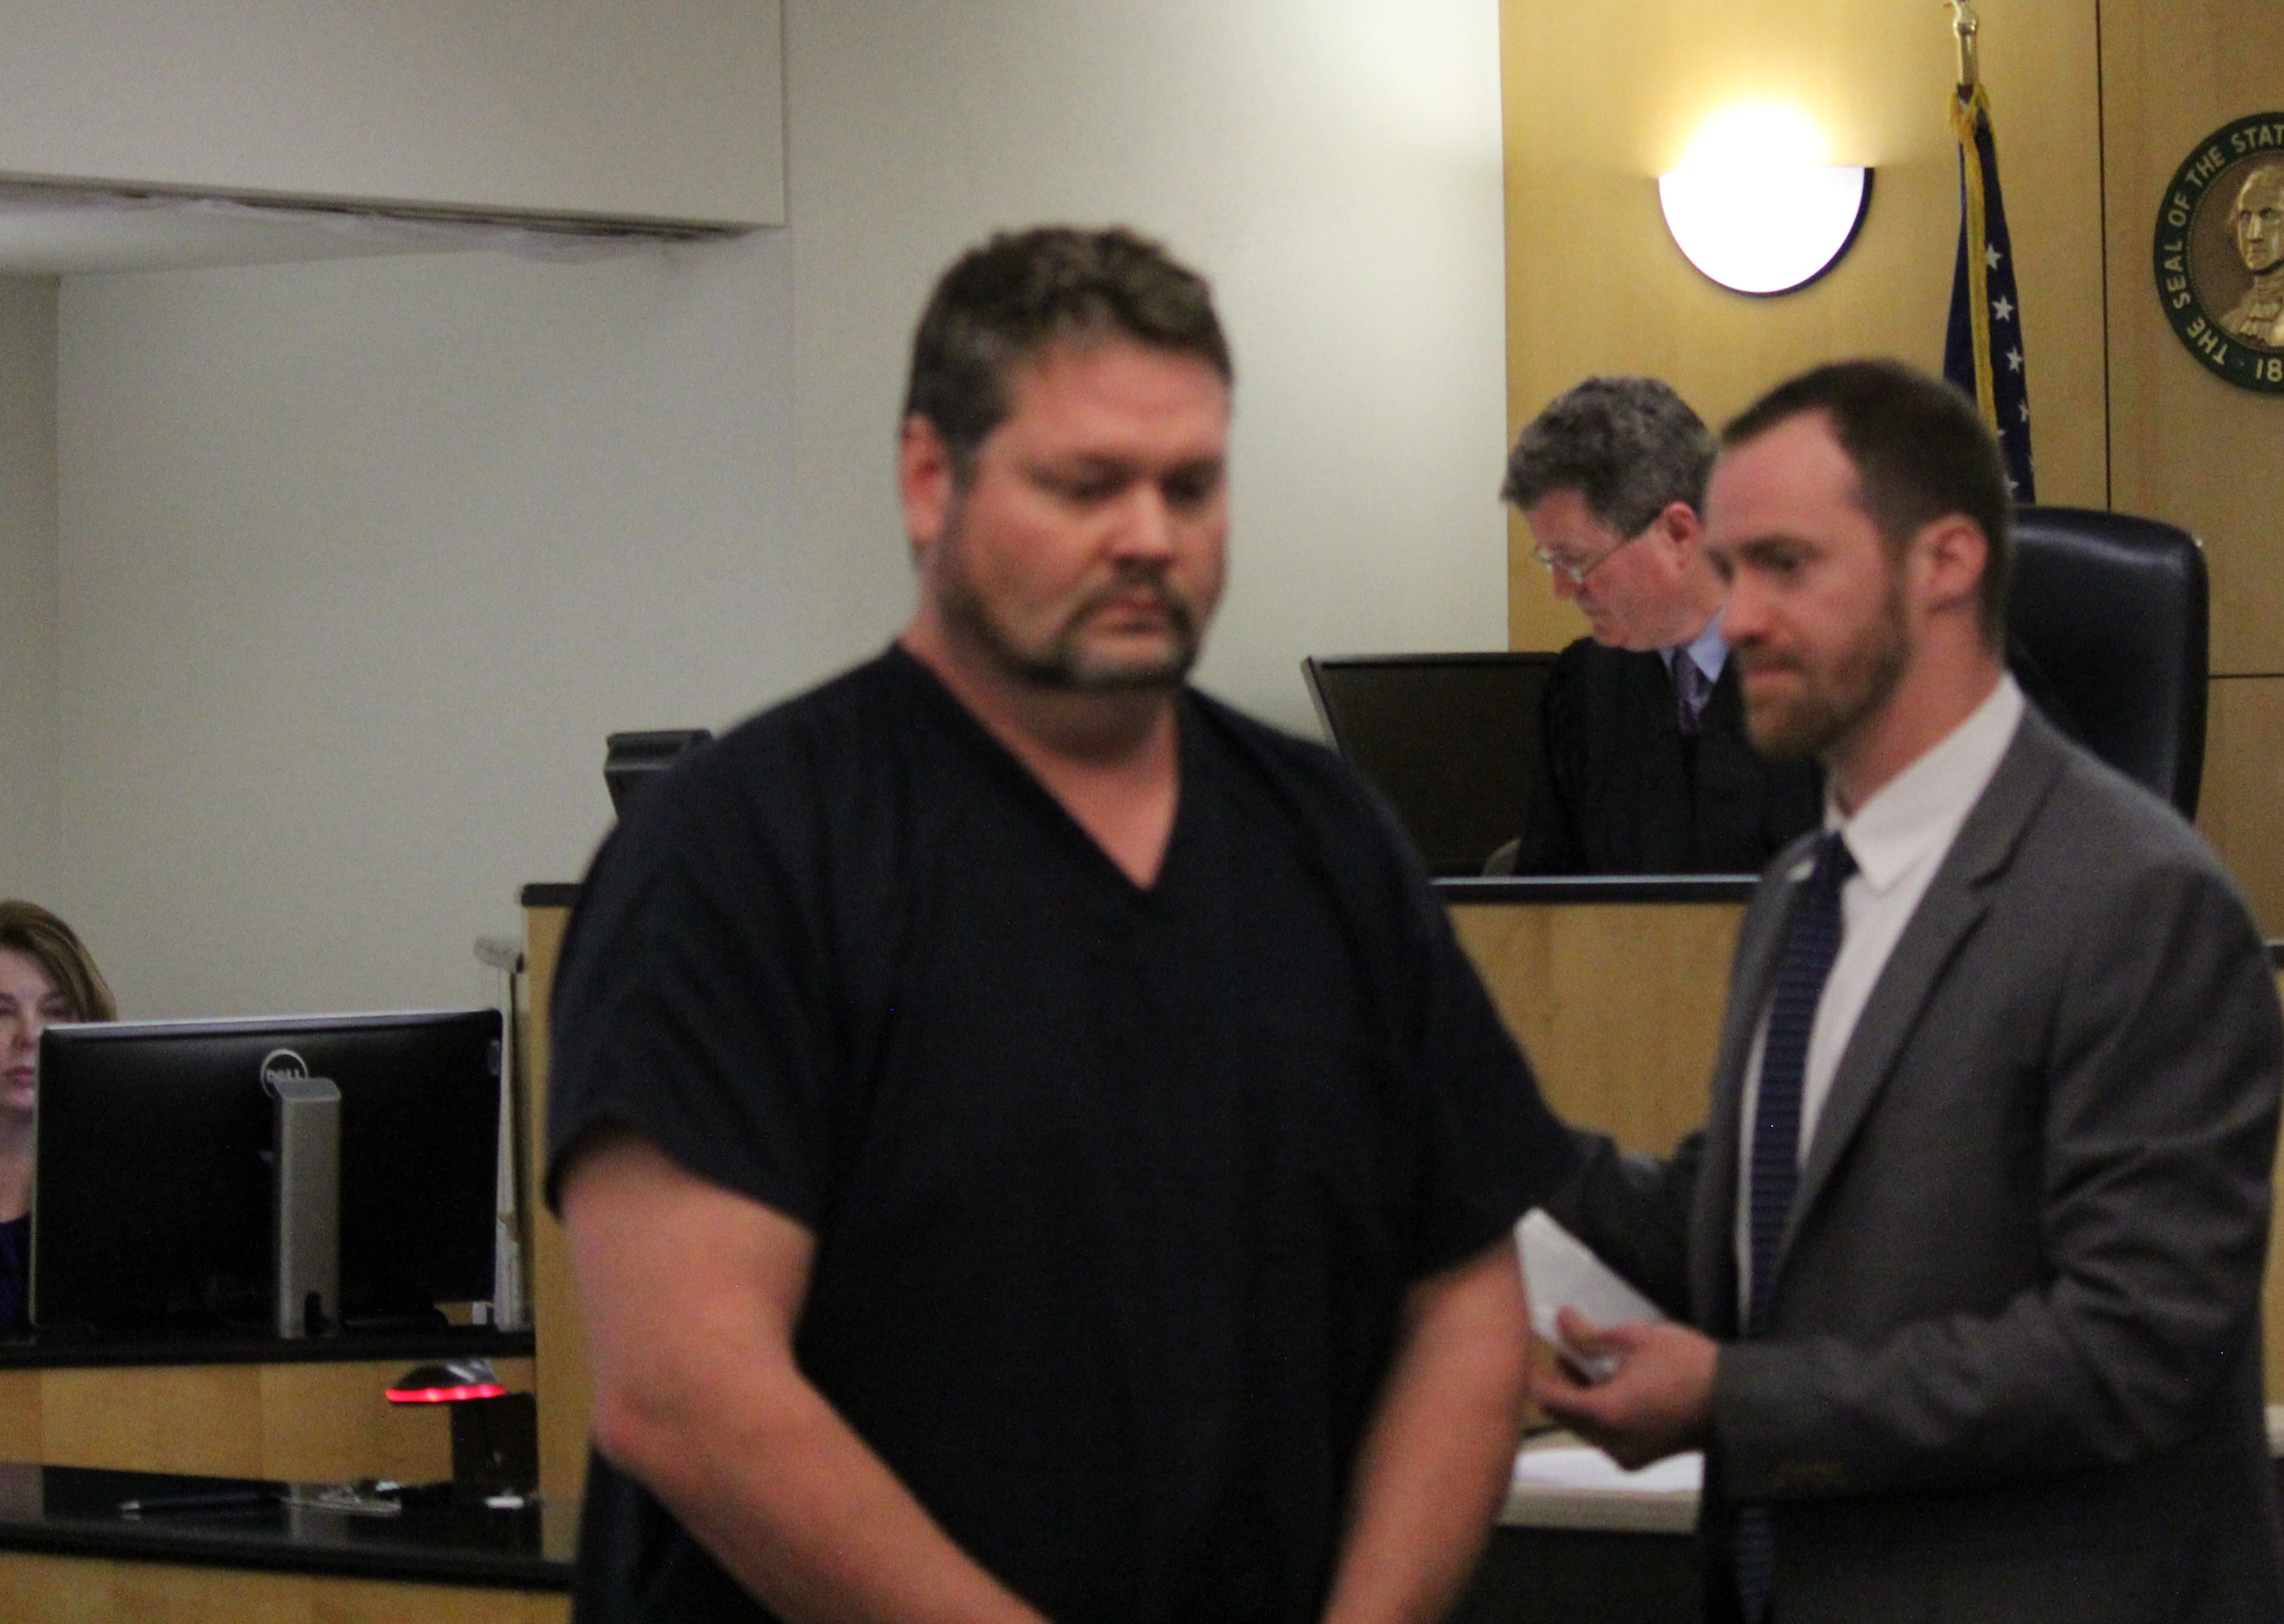 Nicholas A. Clark (center) appears in Clark County Superior Court on Monday to face charges of possessing depictions of a minor engaged in sexually explicit conduct. A deputy prosecutor said Clark coached youth football in the county.